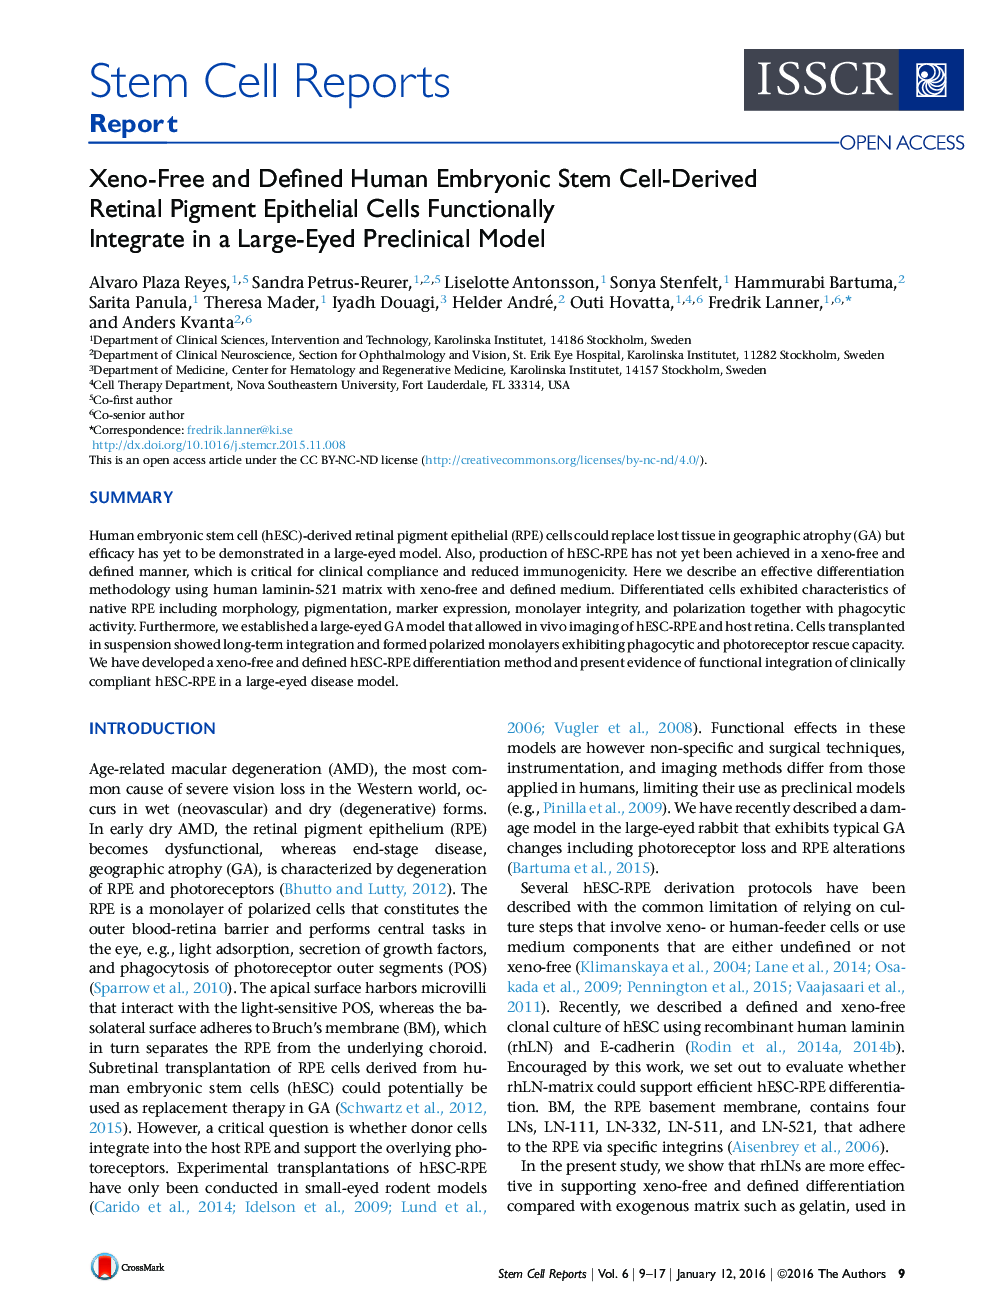 Xeno-Free and Defined Human Embryonic Stem Cell-Derived Retinal Pigment Epithelial Cells Functionally Integrate in a Large-Eyed Preclinical Model 